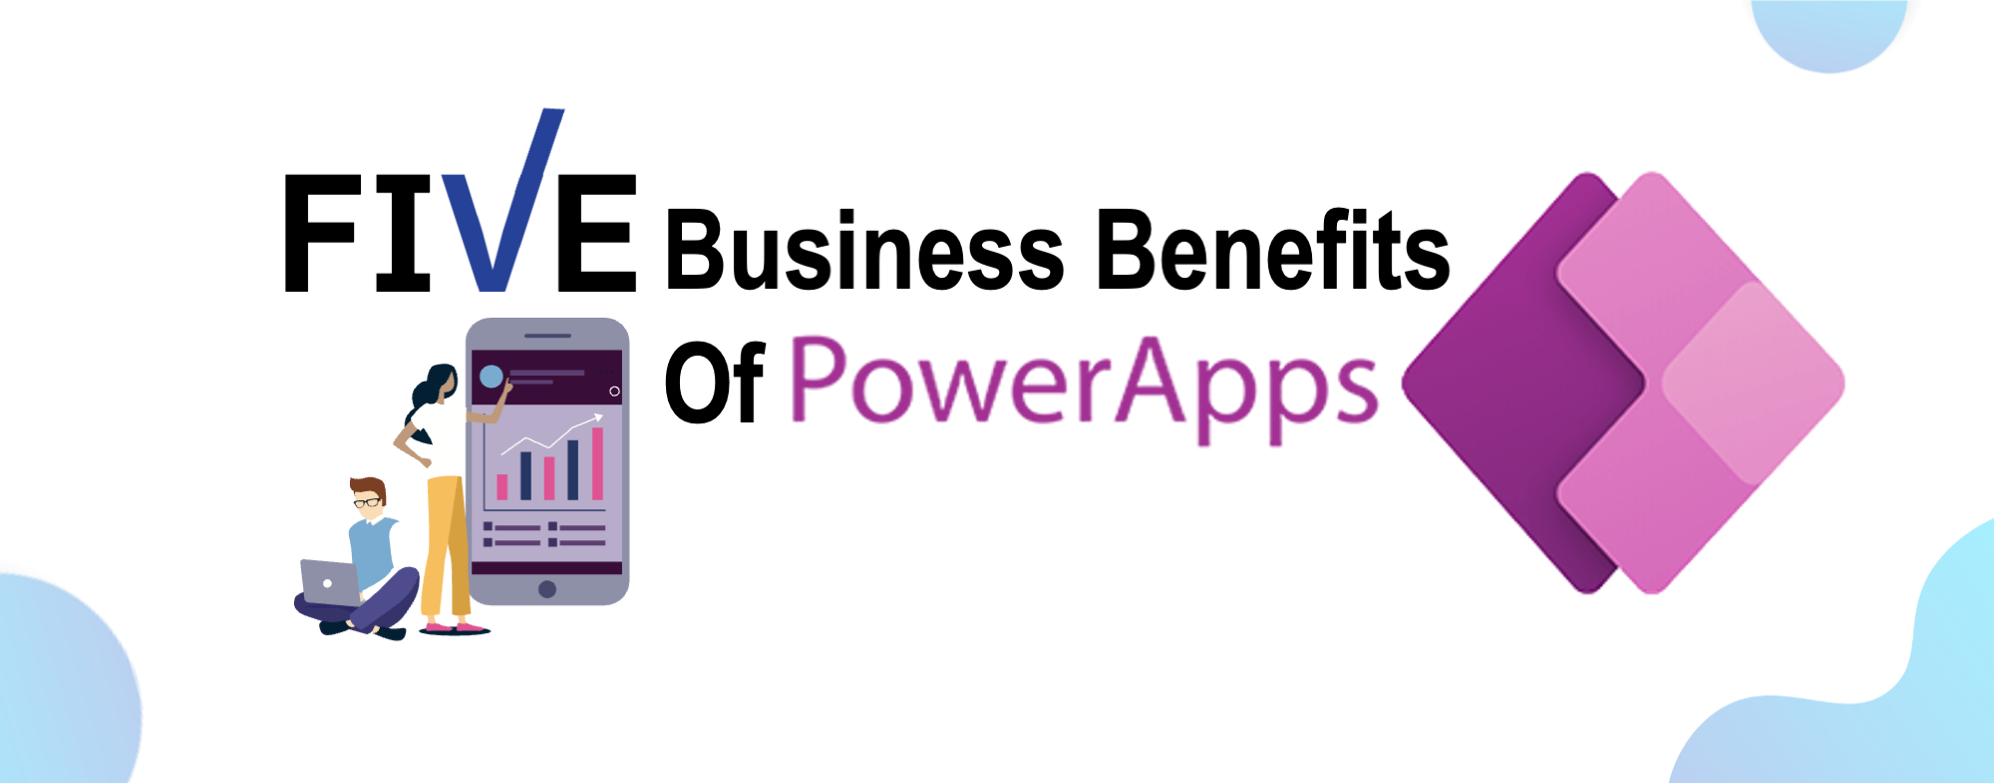 Five Business Benefits of Power Apps 